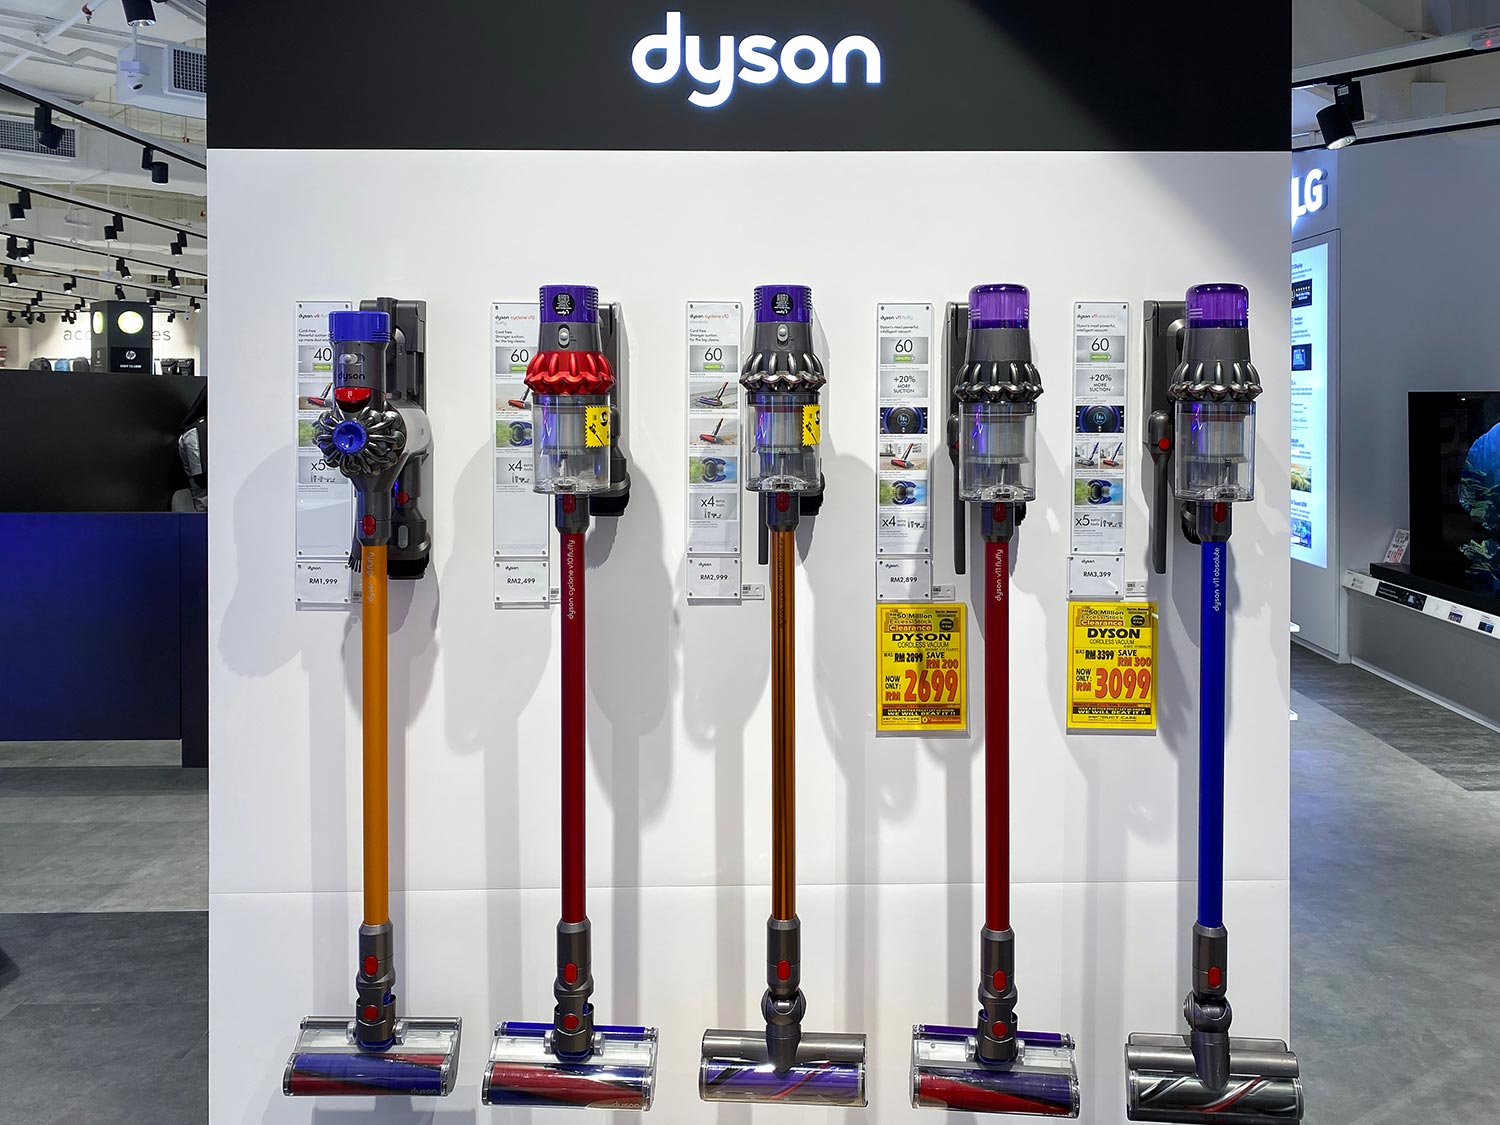 Dyson display all their high quality latest vacuum cleaner V8